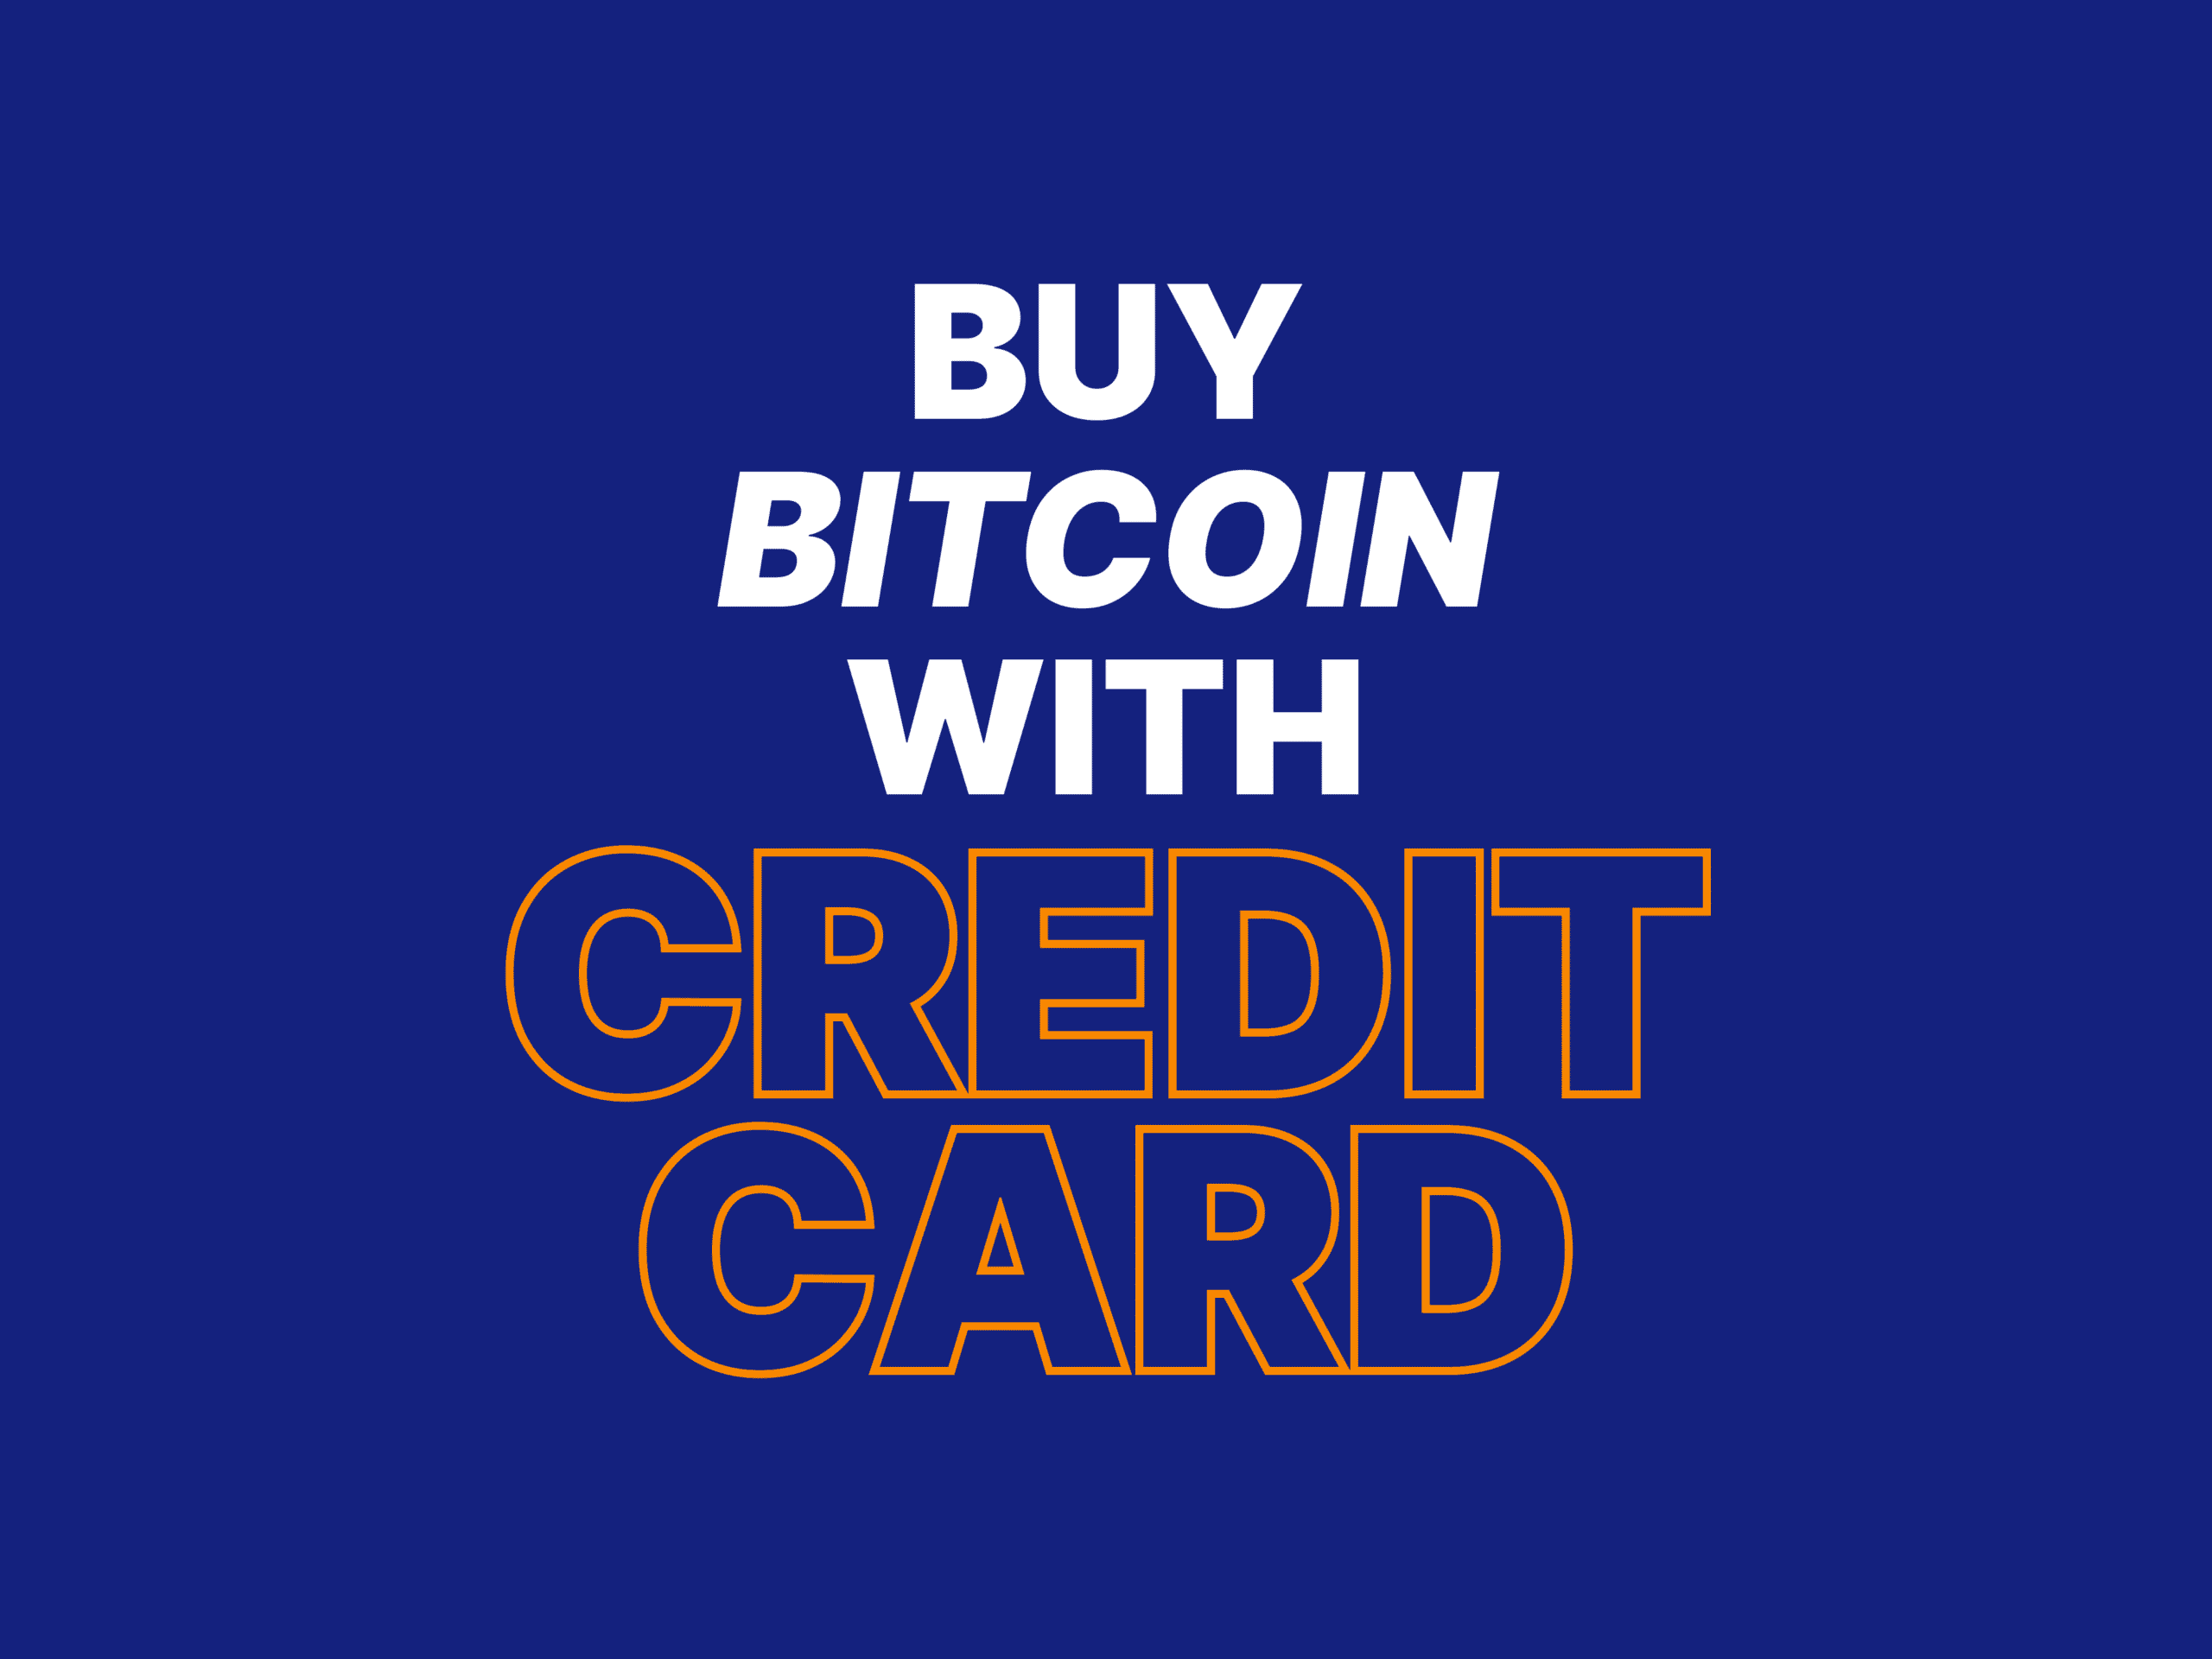 How To Buy Bitcoin With Credit Card Or Debit Card and Without Verification? - Relai